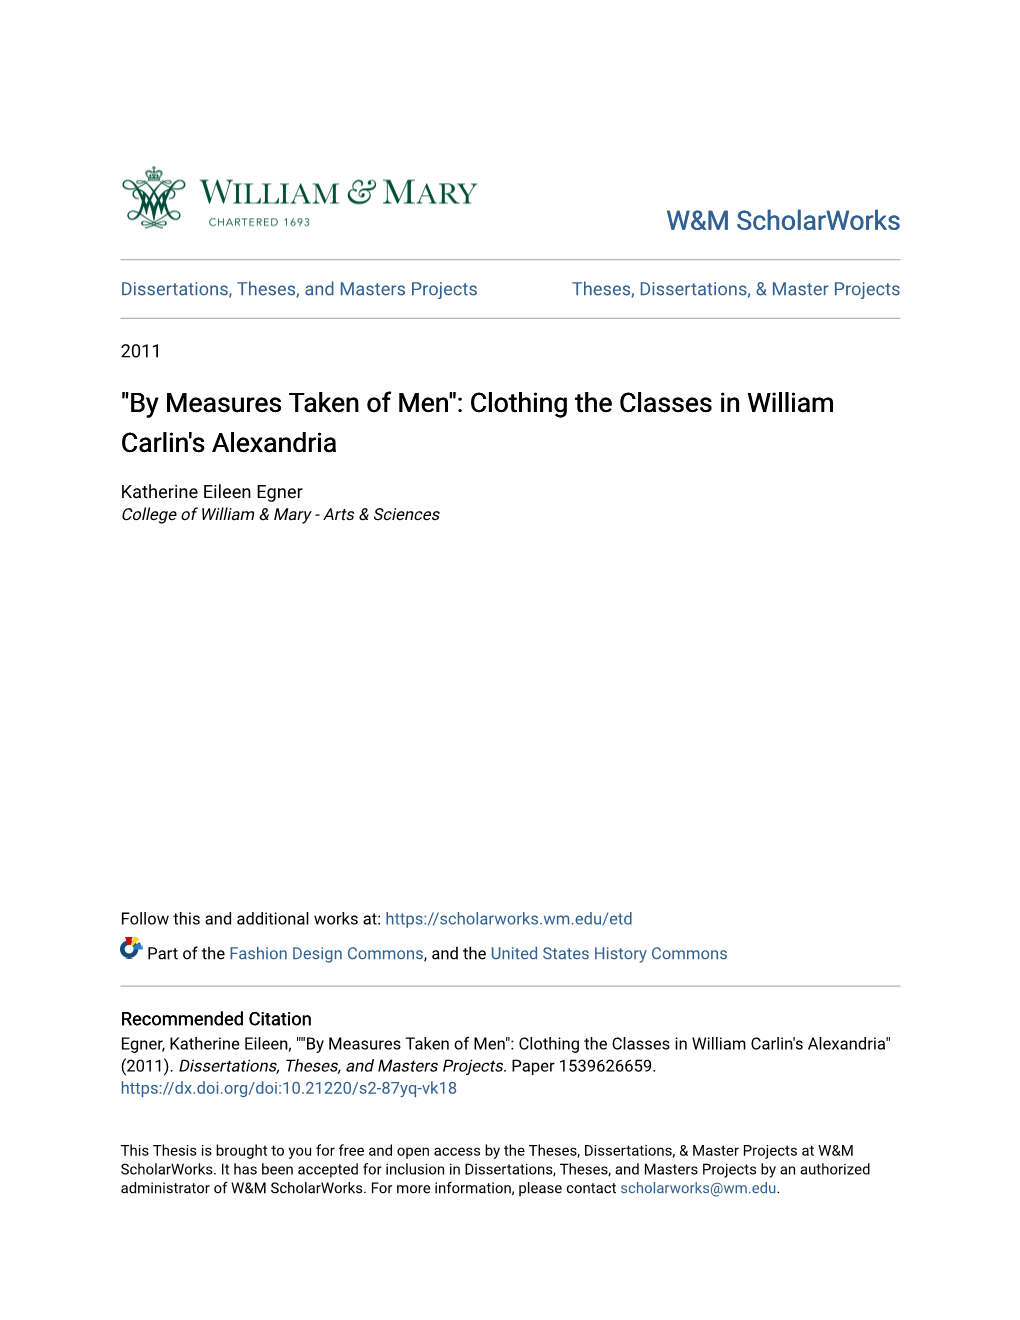 Clothing the Classes in William Carlin's Alexandria